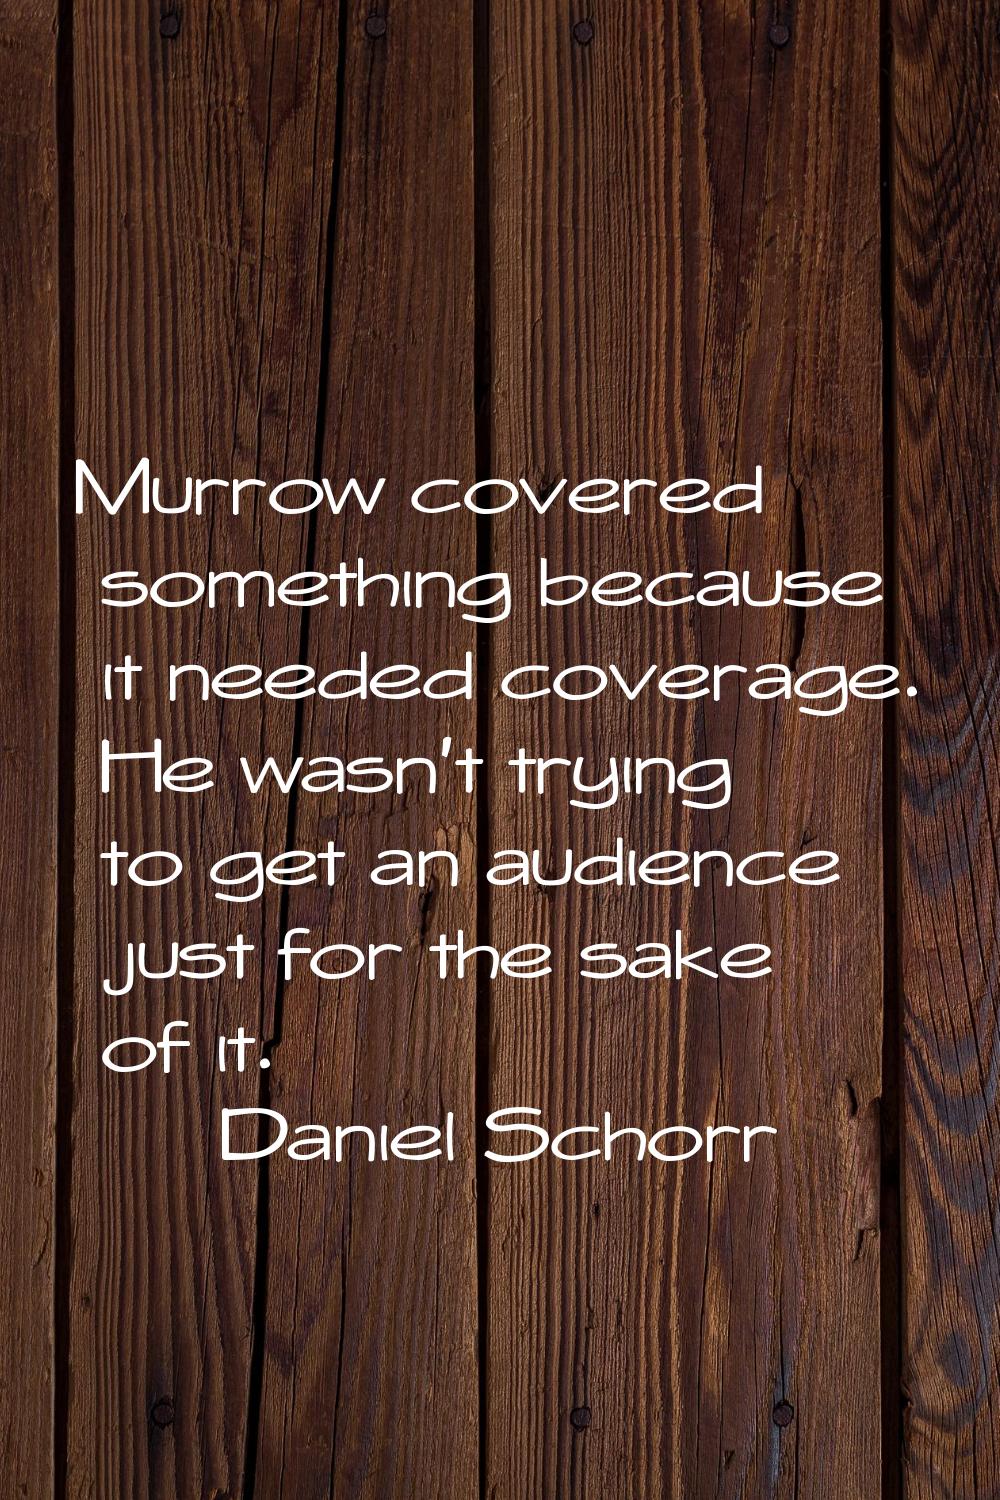 Murrow covered something because it needed coverage. He wasn't trying to get an audience just for t